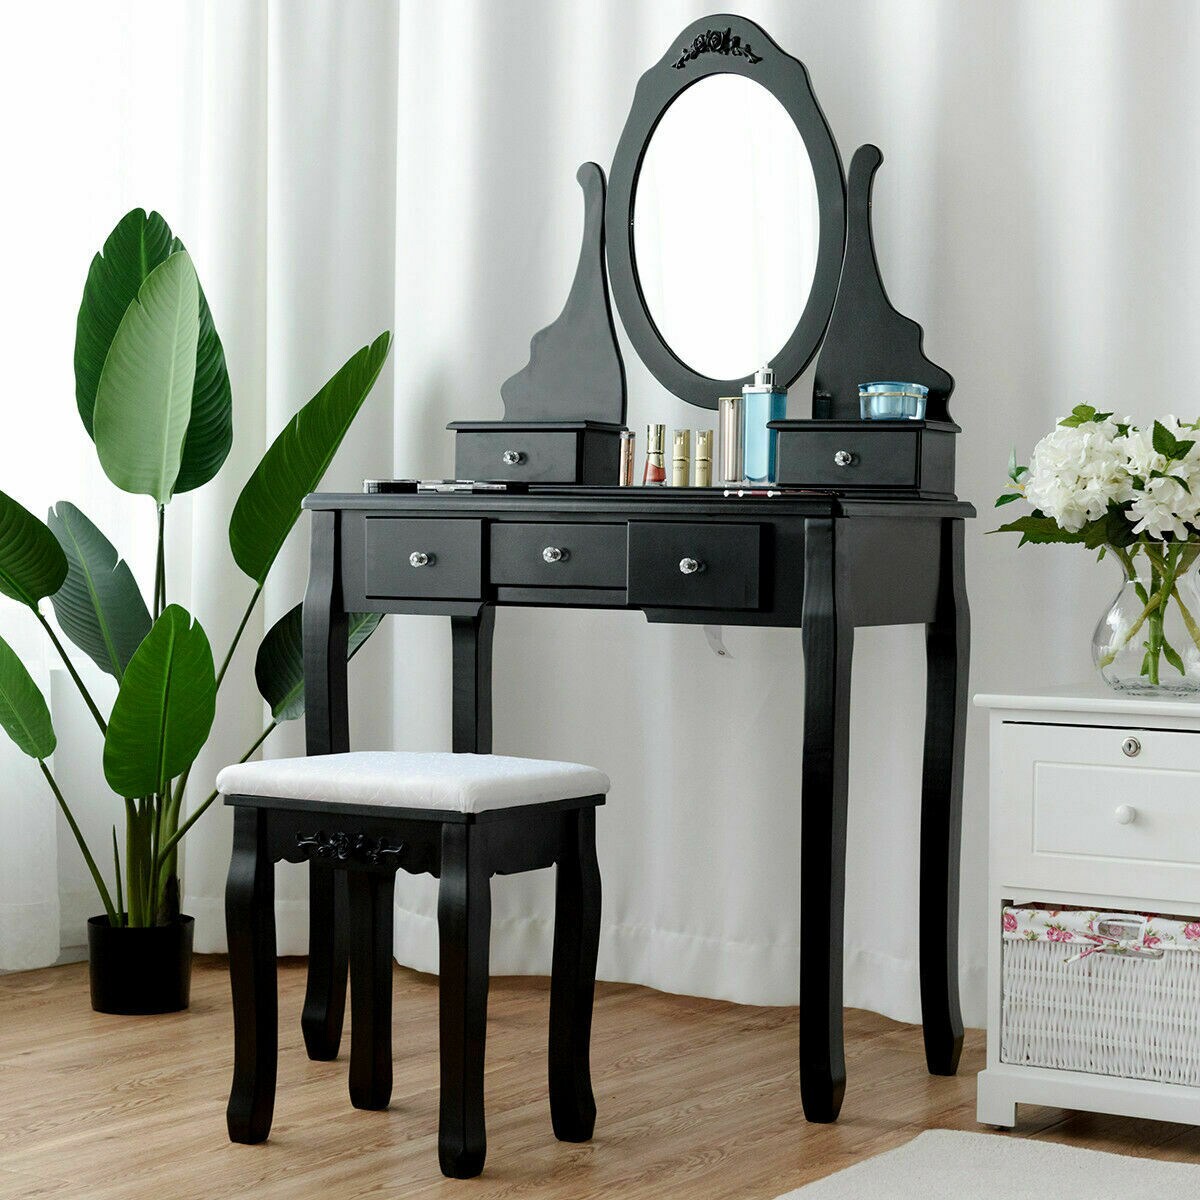 Gymax Vanity Jewelry Wooden Makeup Dressing Table Set W/Stool Mirror and 5 Drawers Black